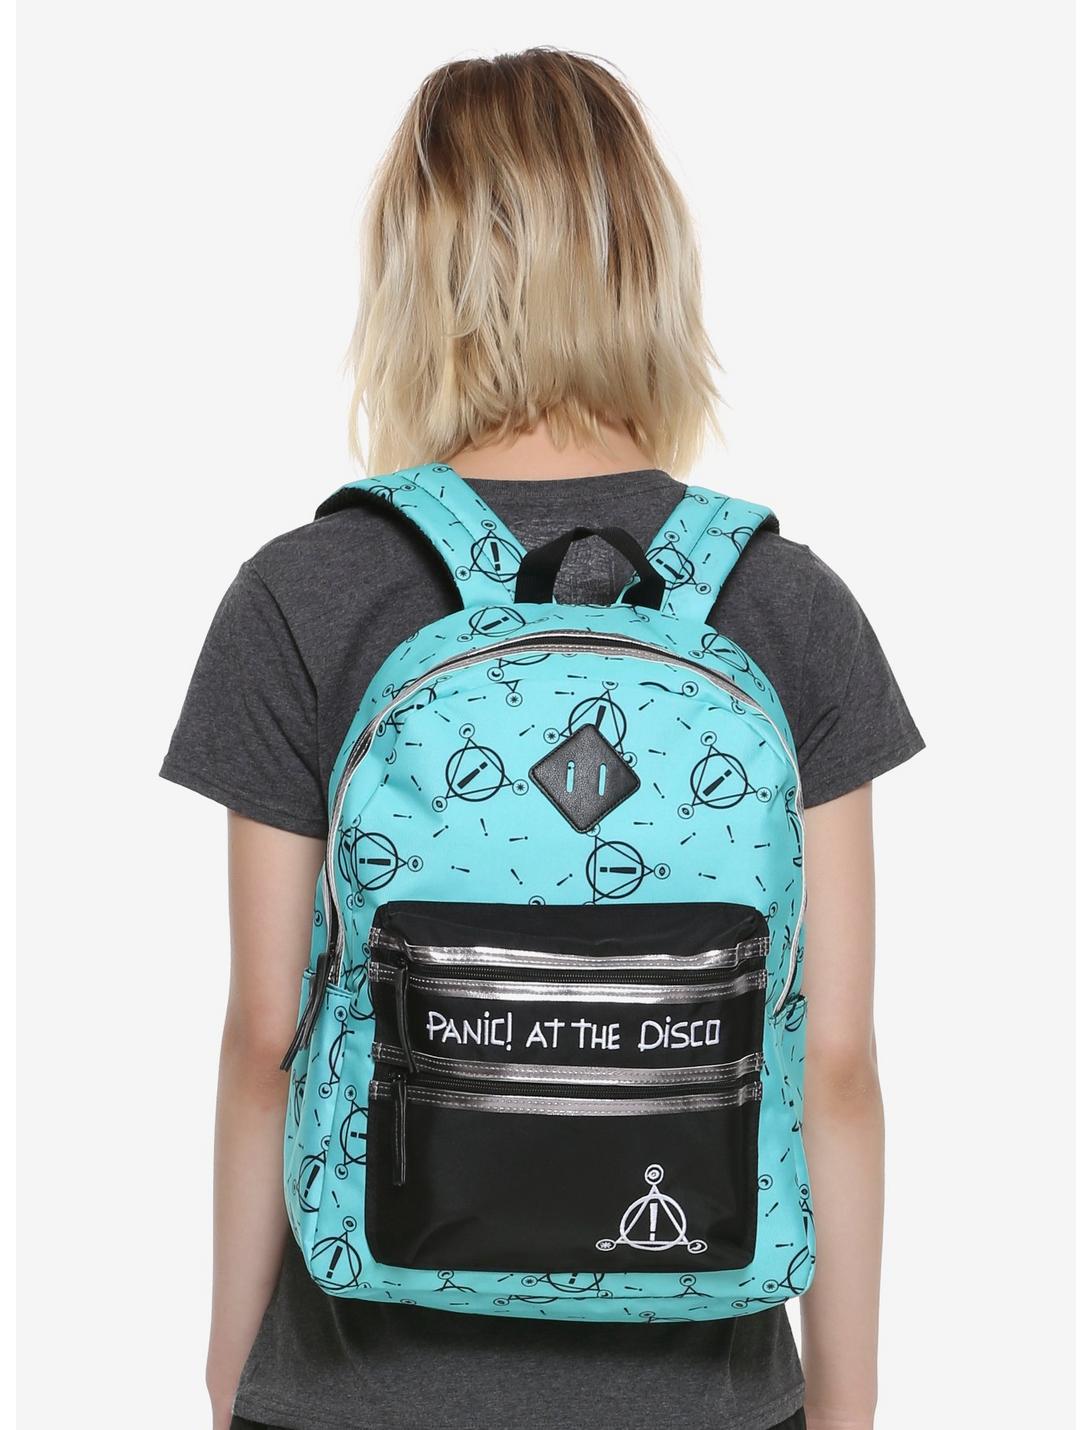 Panic! At The Disco Teal Double Zipper Backpack, , hi-res